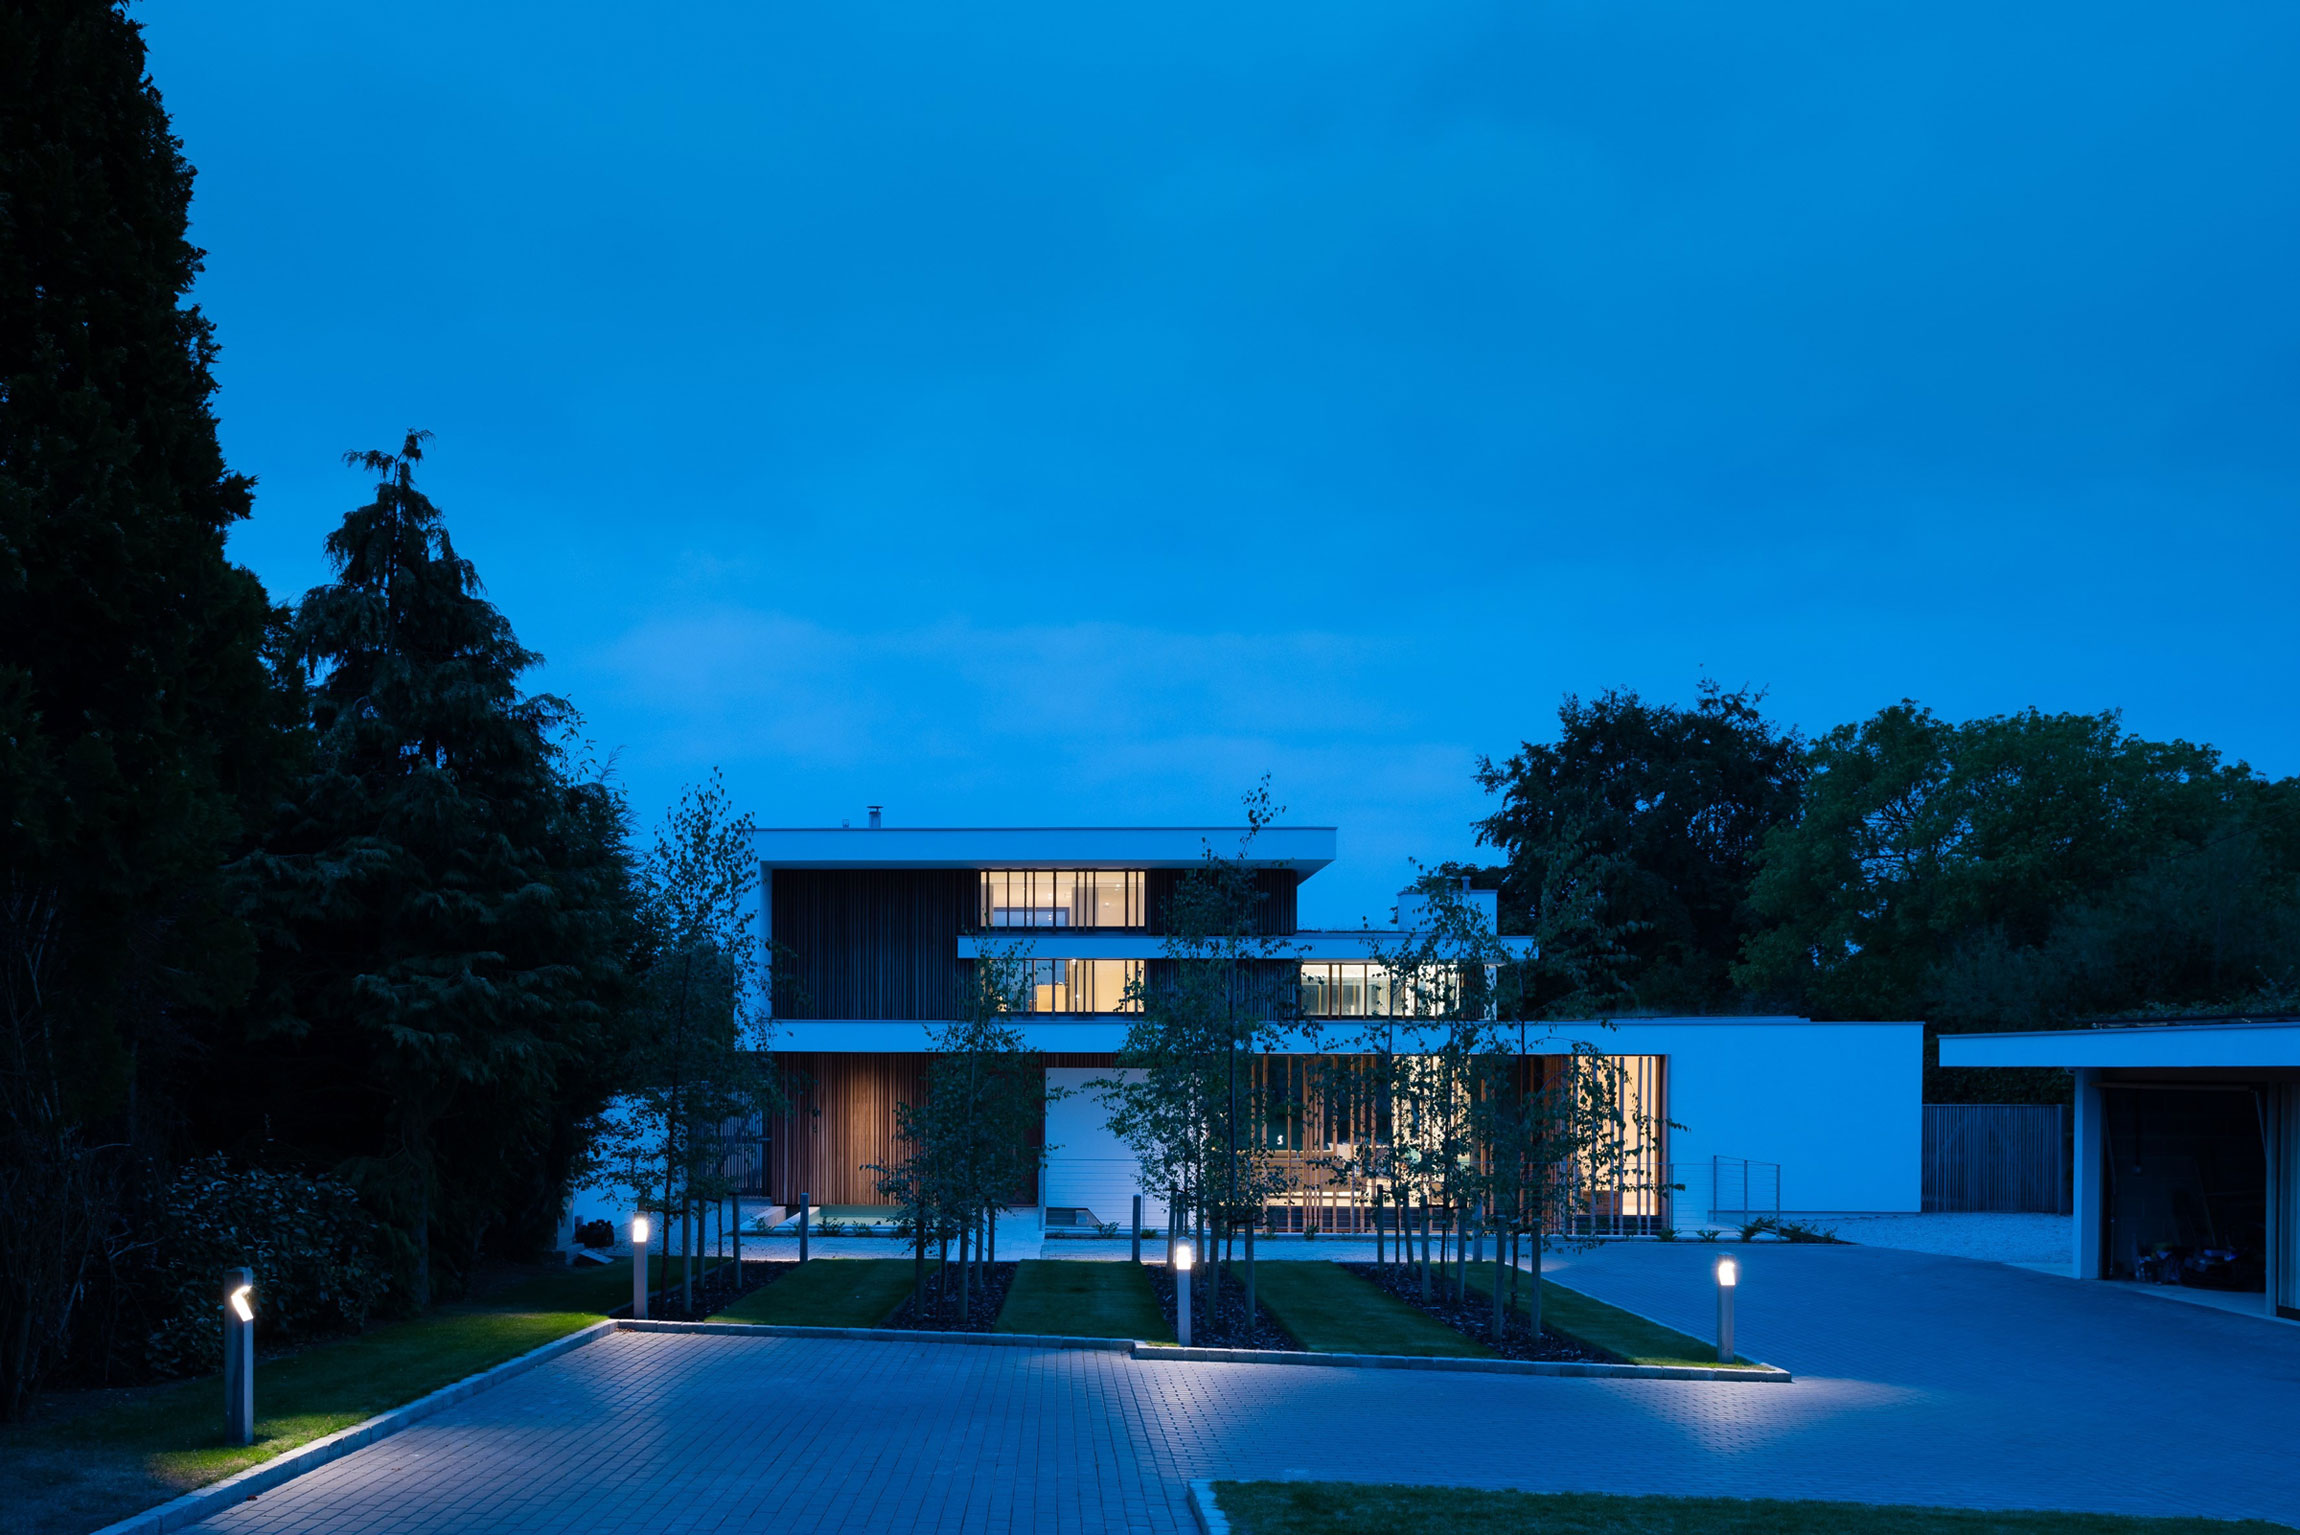 General 2300x1535 house modern luxury architecture mansions blue low light